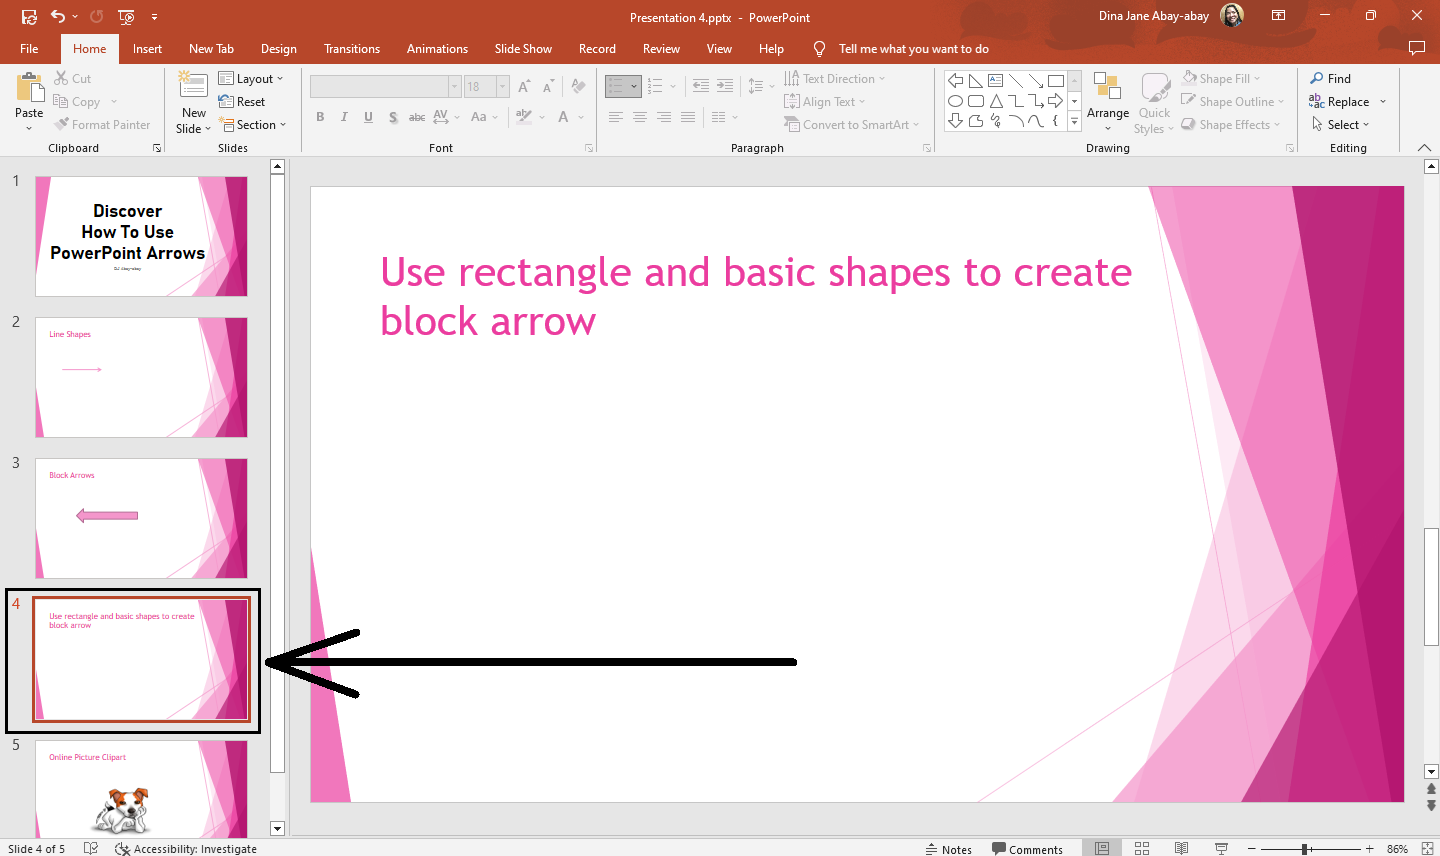 Select a presentation slide in your MS PowerPoint.